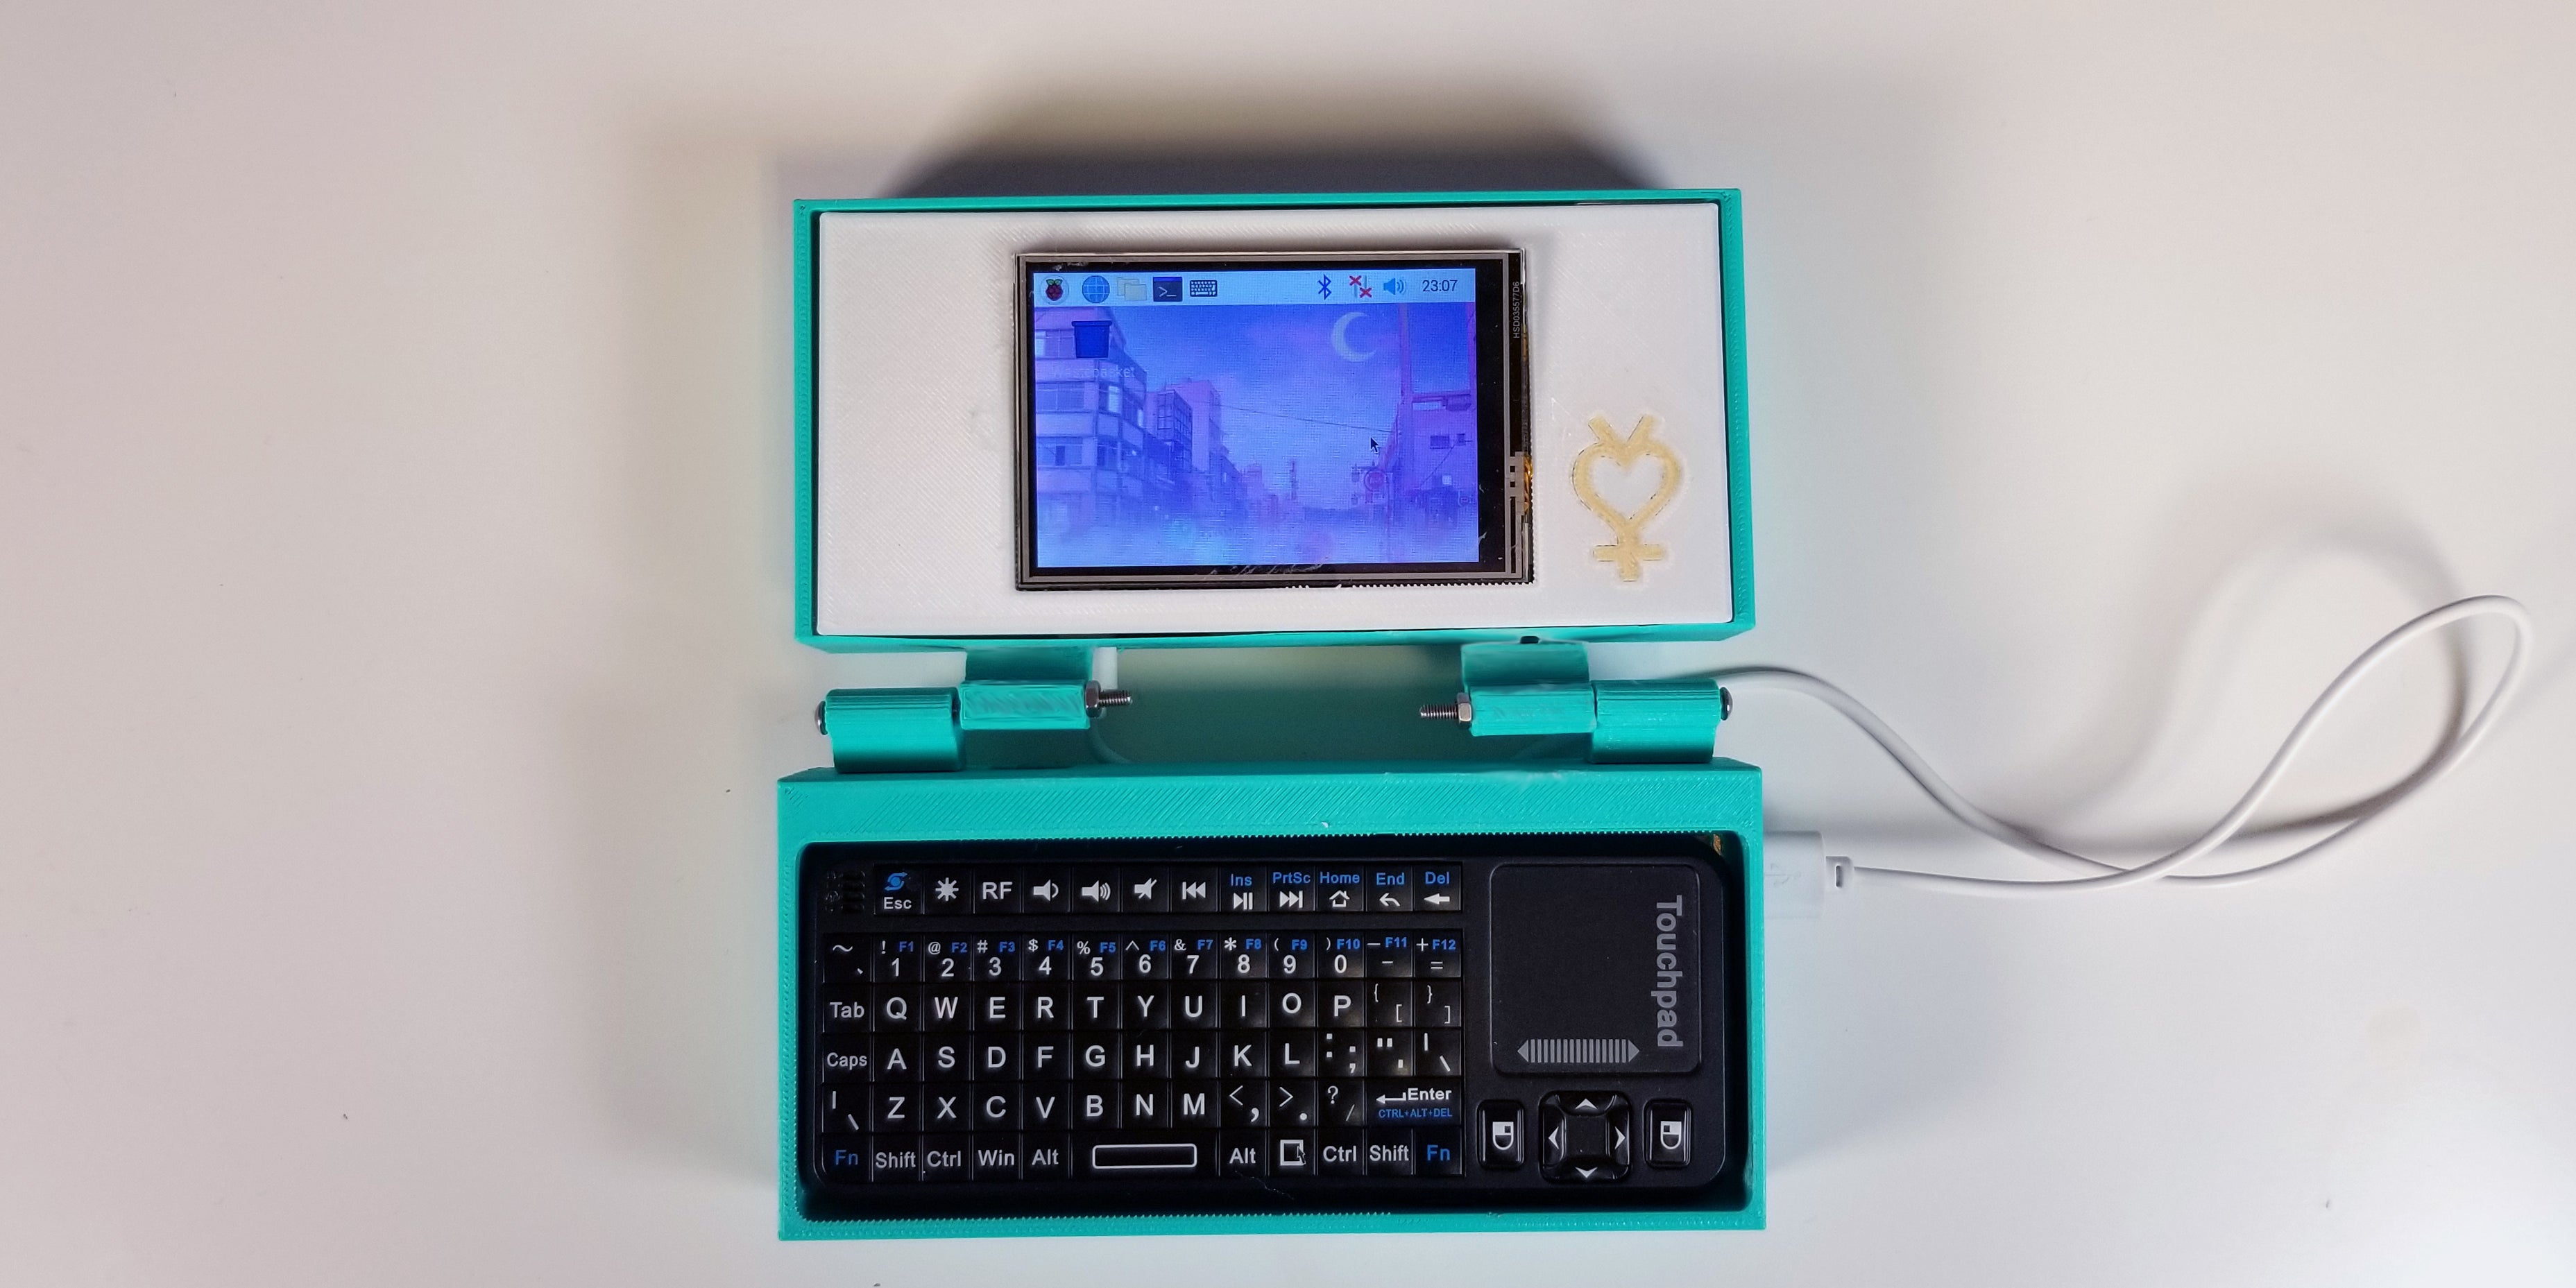 Palette Builds: Your Own Mini Computer Image